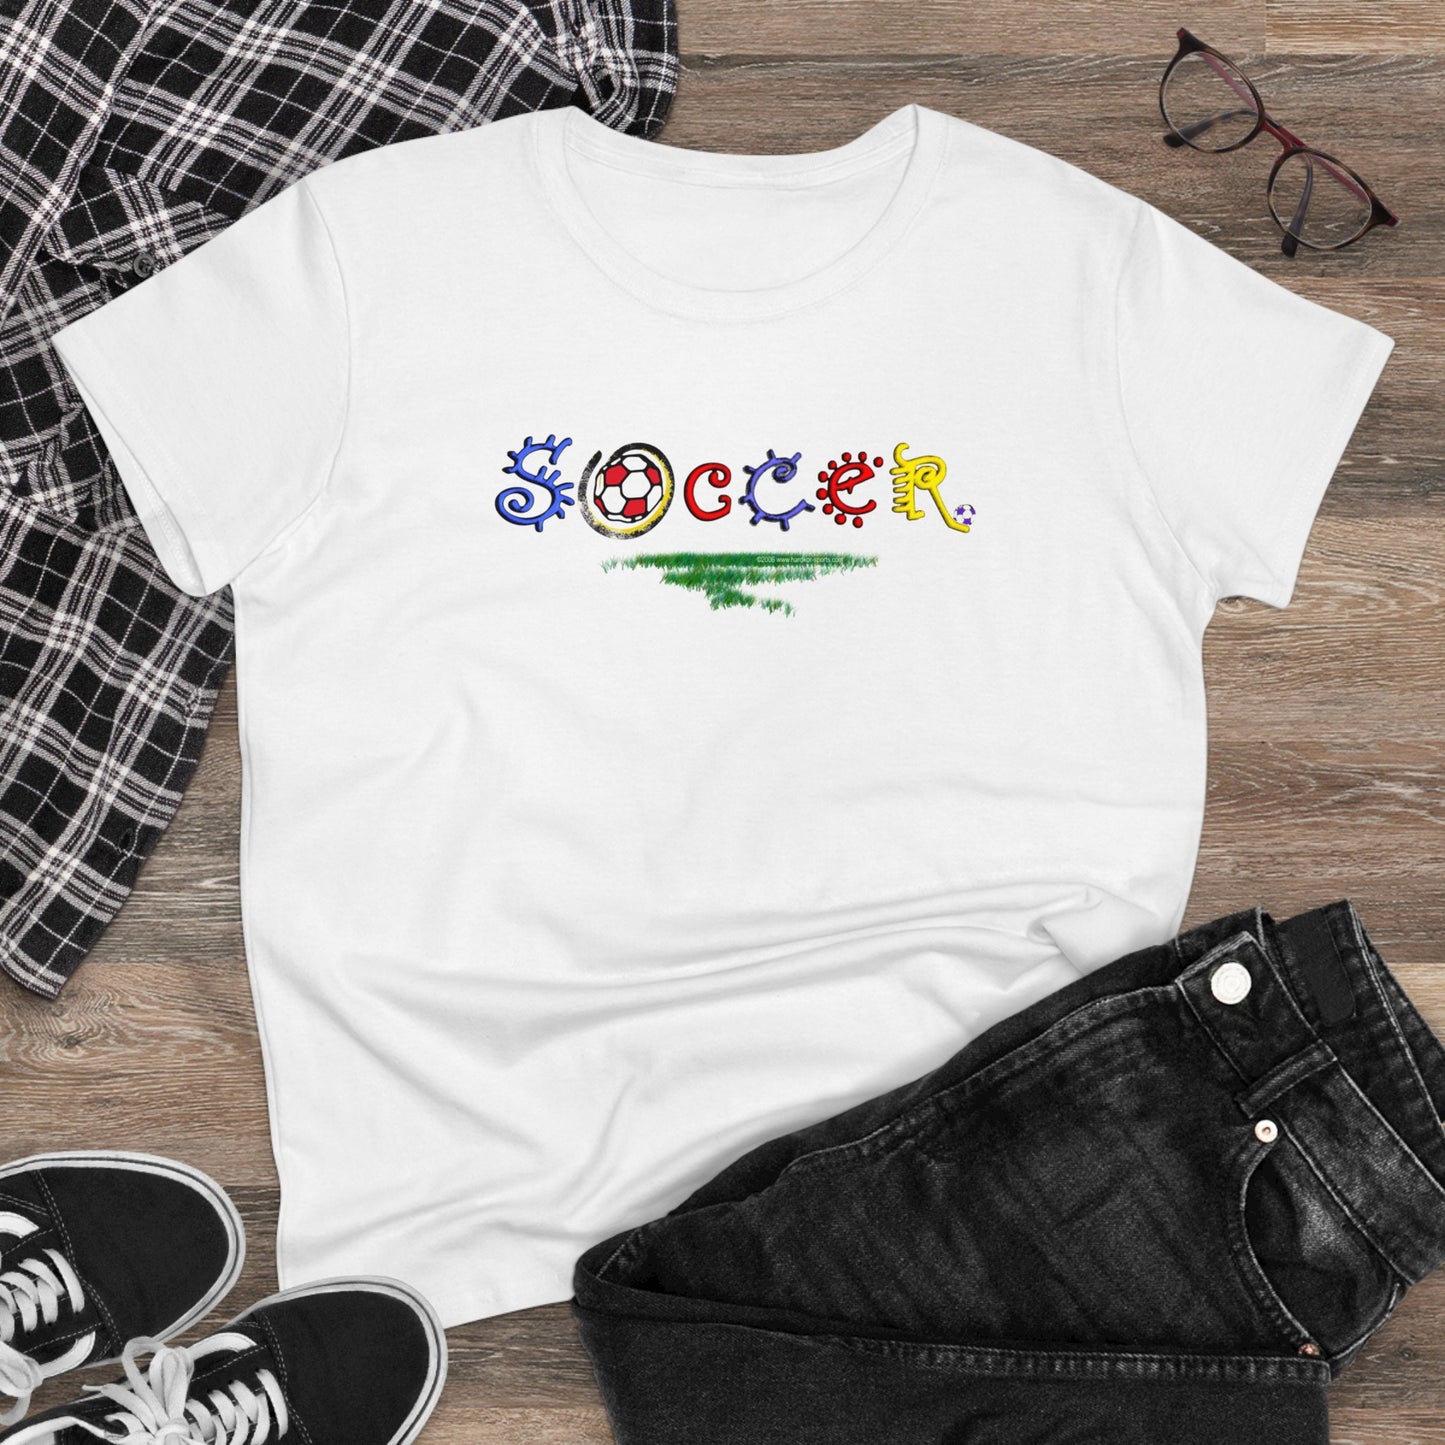 Artistic Soccer Girls T-Shirt, Ladies Soccer Design with Whimsical Soccer Design, Cute hand drawn look, stylized font, Soccer Gift for Women